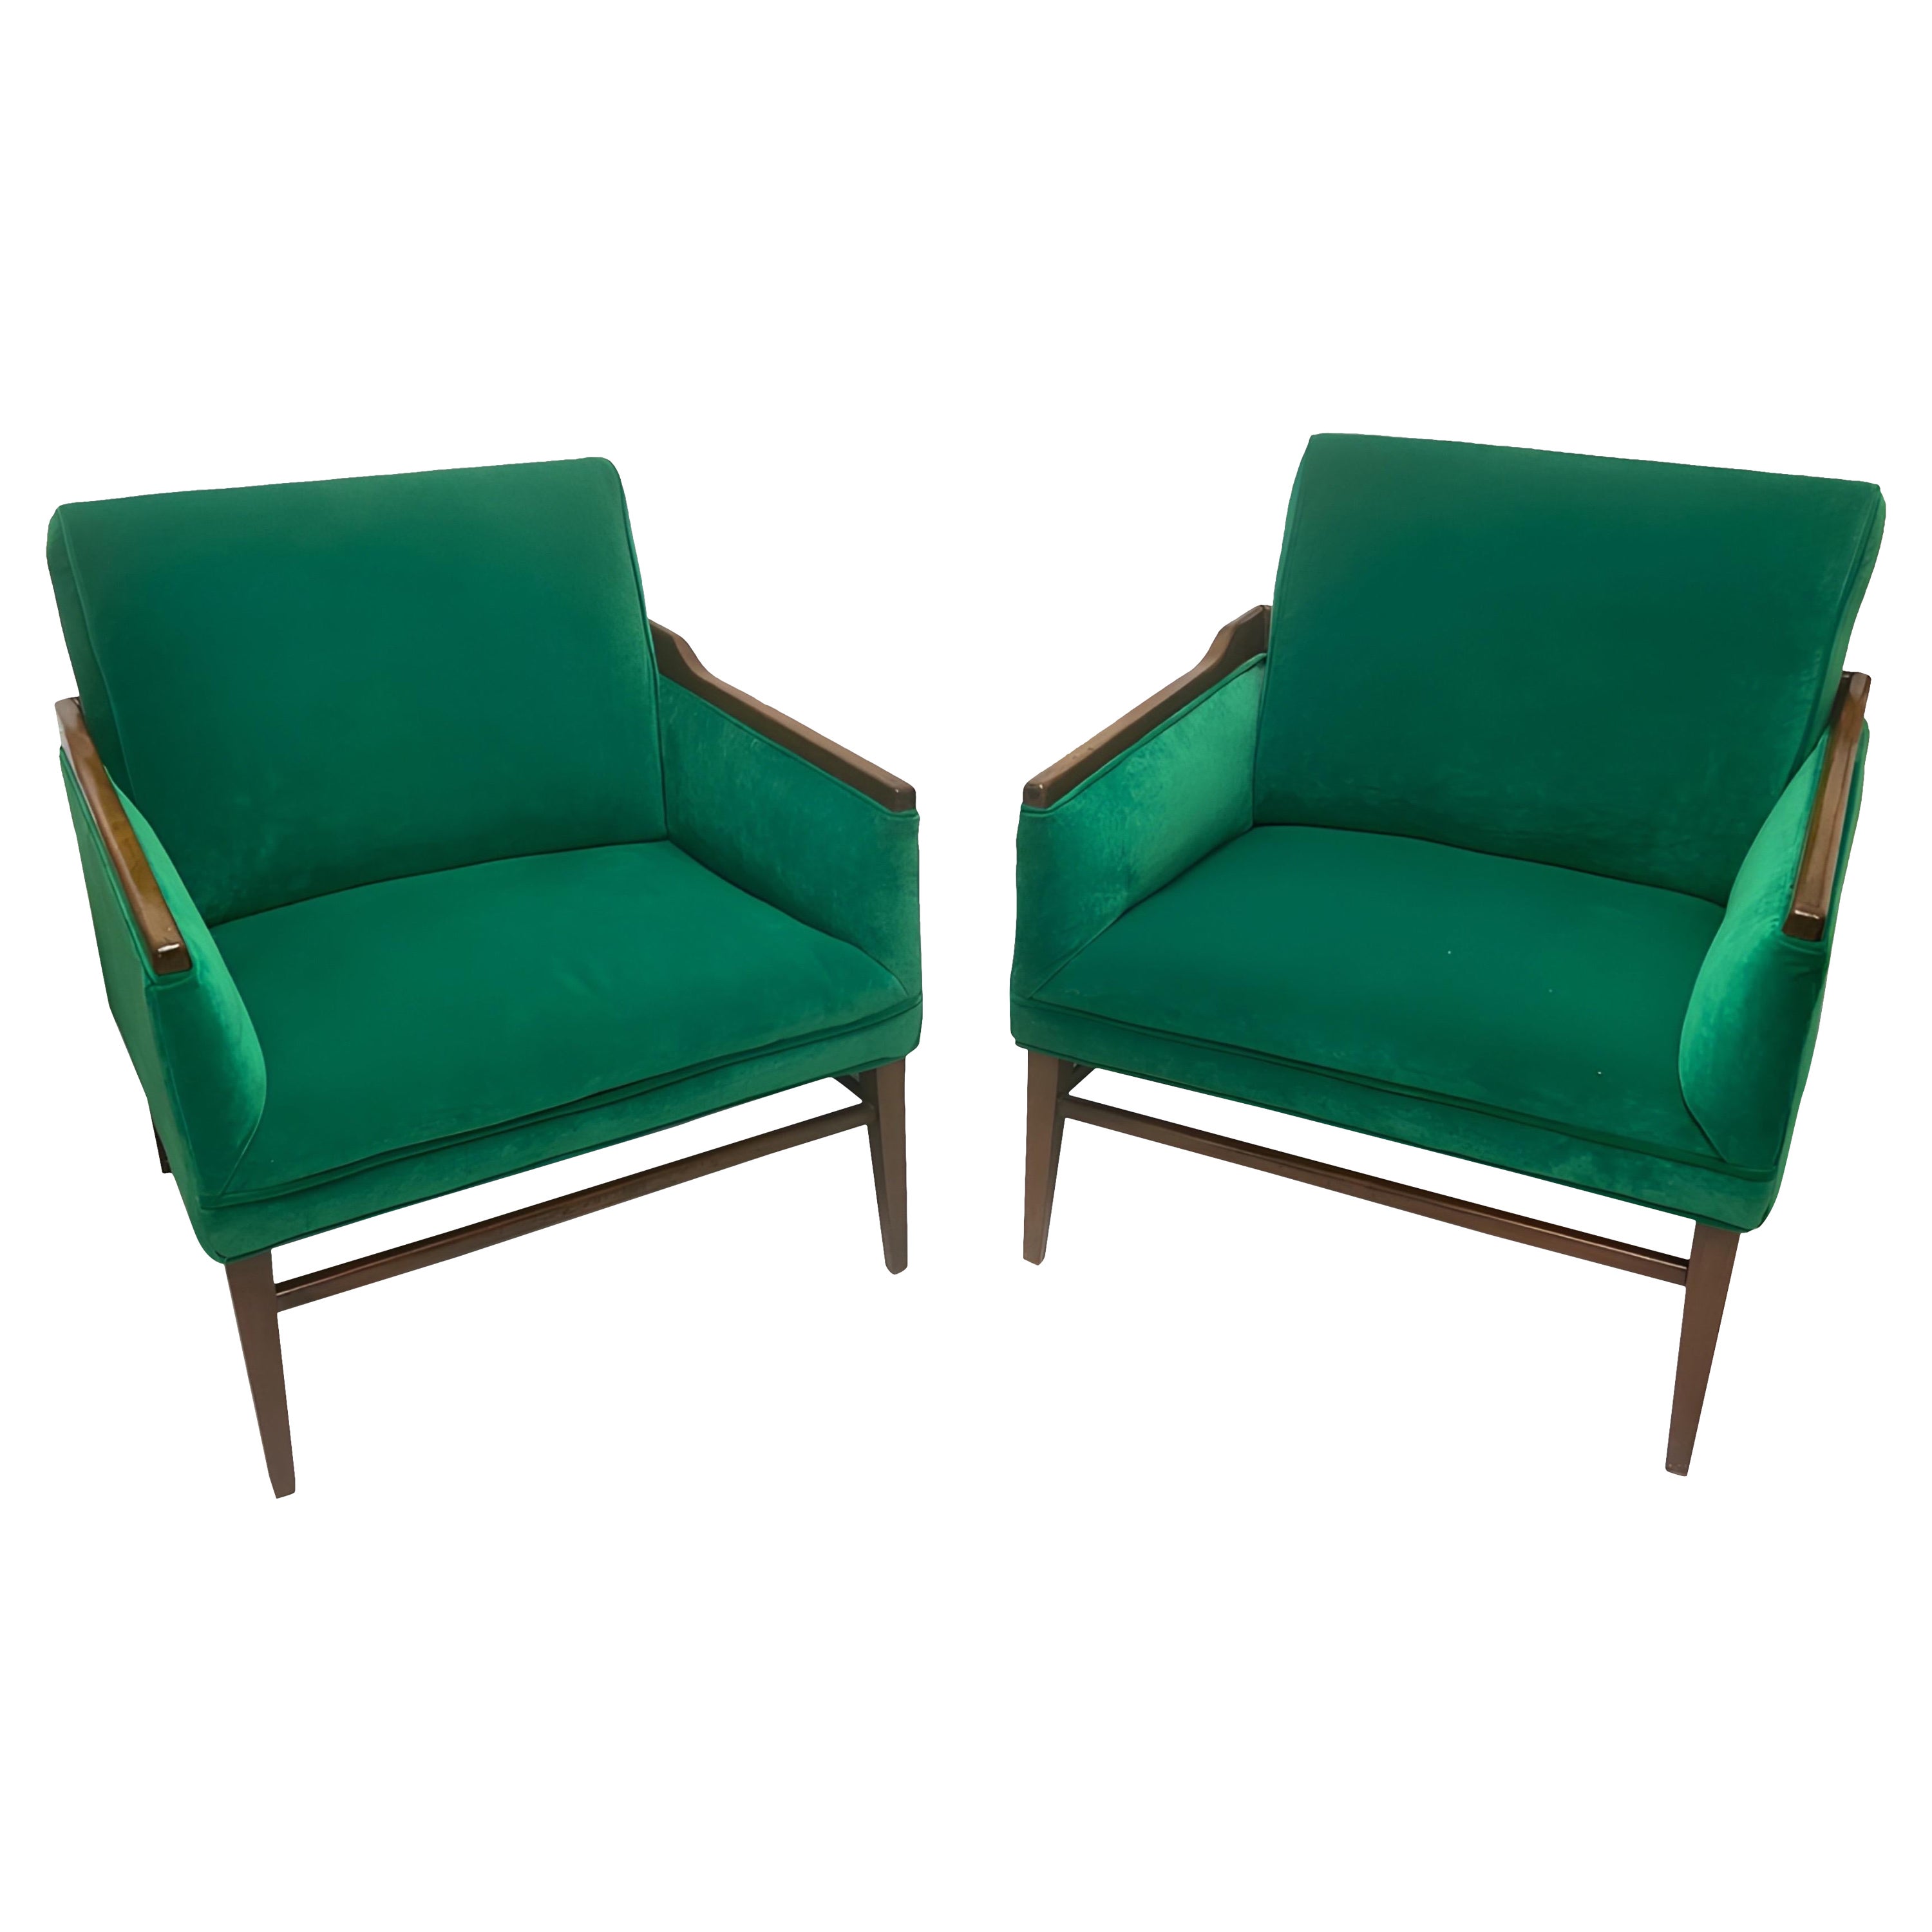 1950’s Walnut and Green Velvet Low Profile Chairs - a Pair For Sale